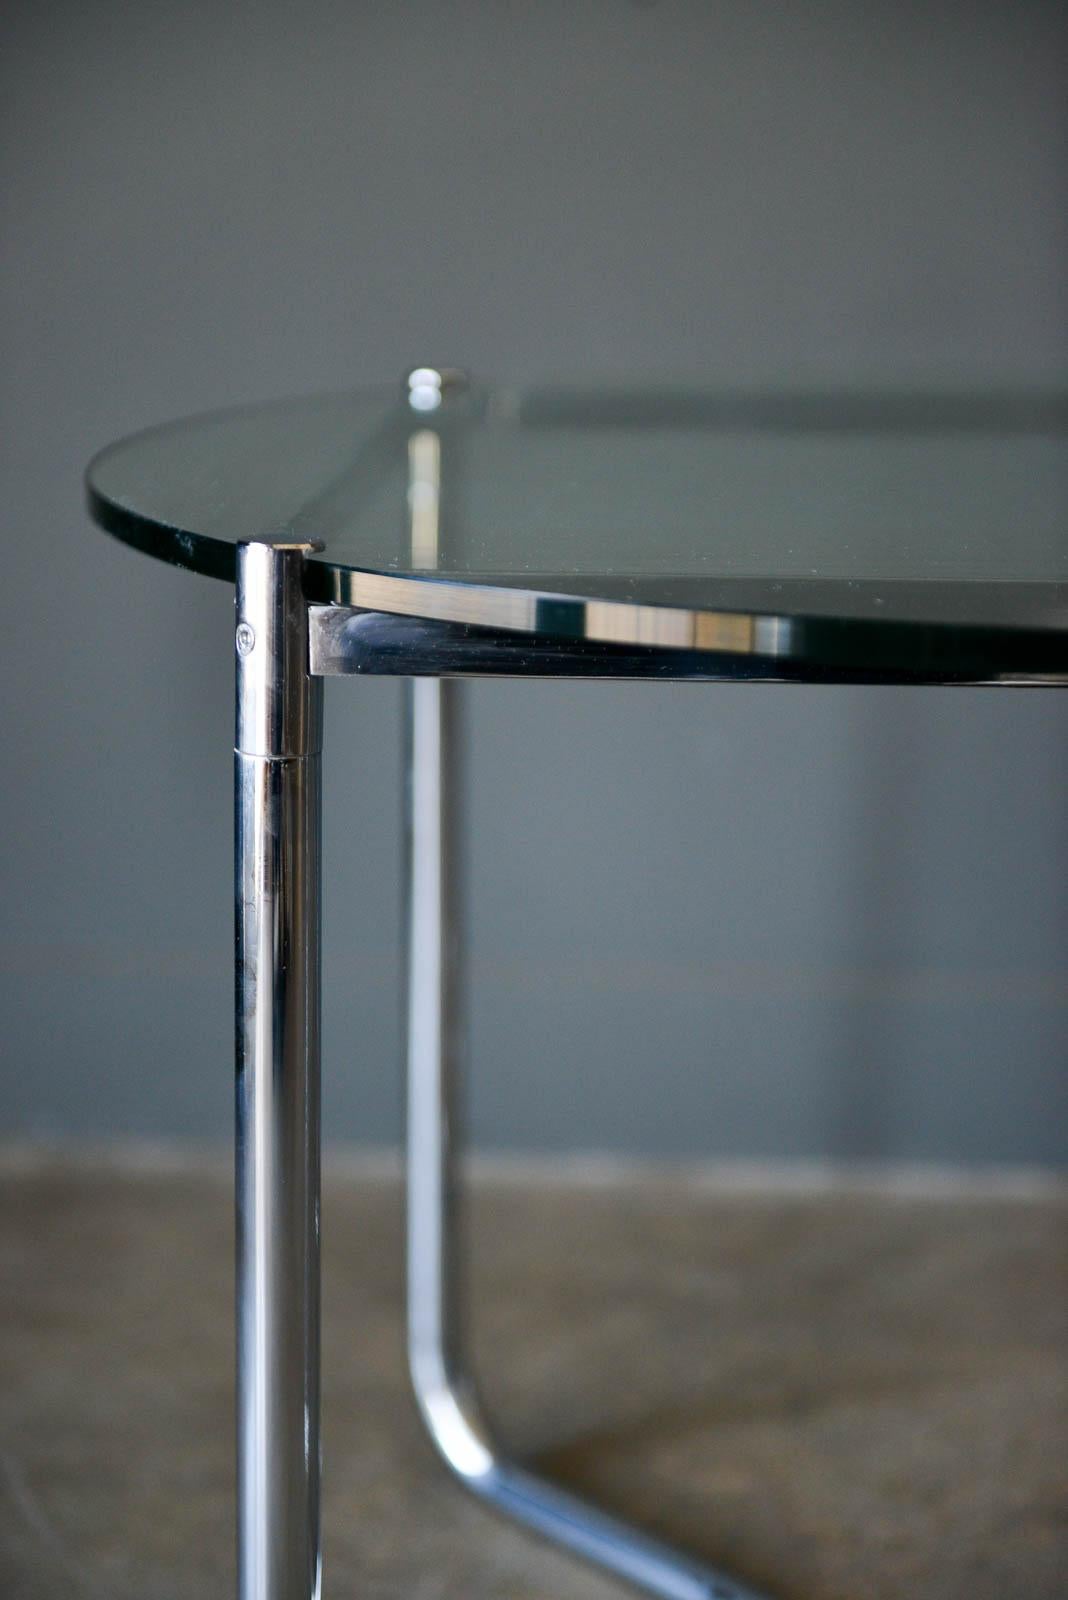 Mies van der Rohe for Knoll chrome and glass side table, circa 1975. Very good original condition with shiny polished chrome-plated steel. Glass has minor wear as shown.

Measures: 27